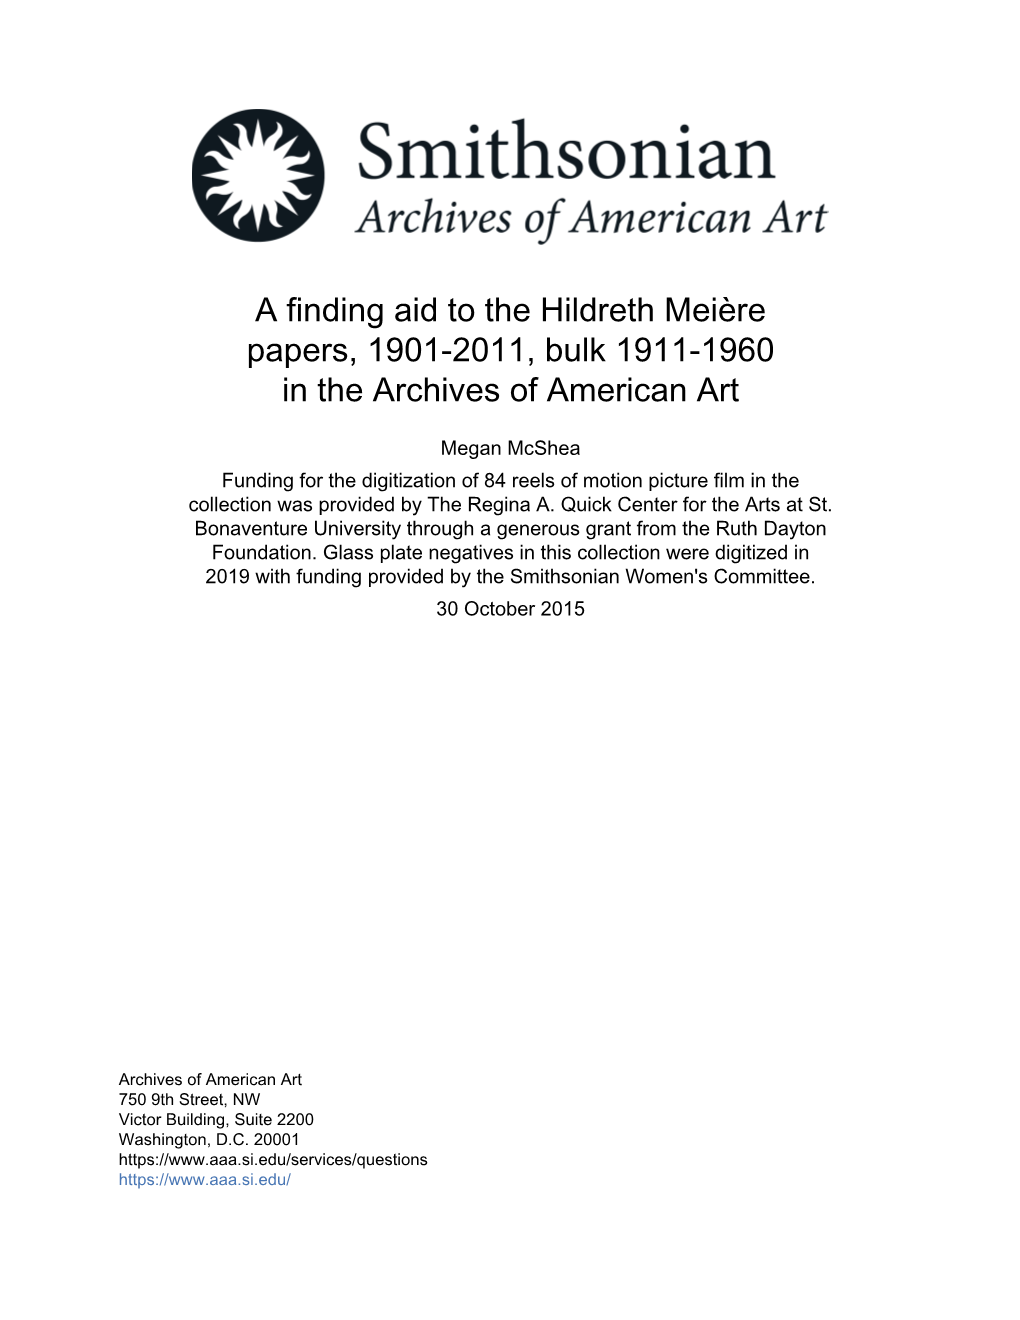 A Finding Aid to the Hildreth Meière Papers, 1901-2011, Bulk 1911-1960 in the Archives of American Art